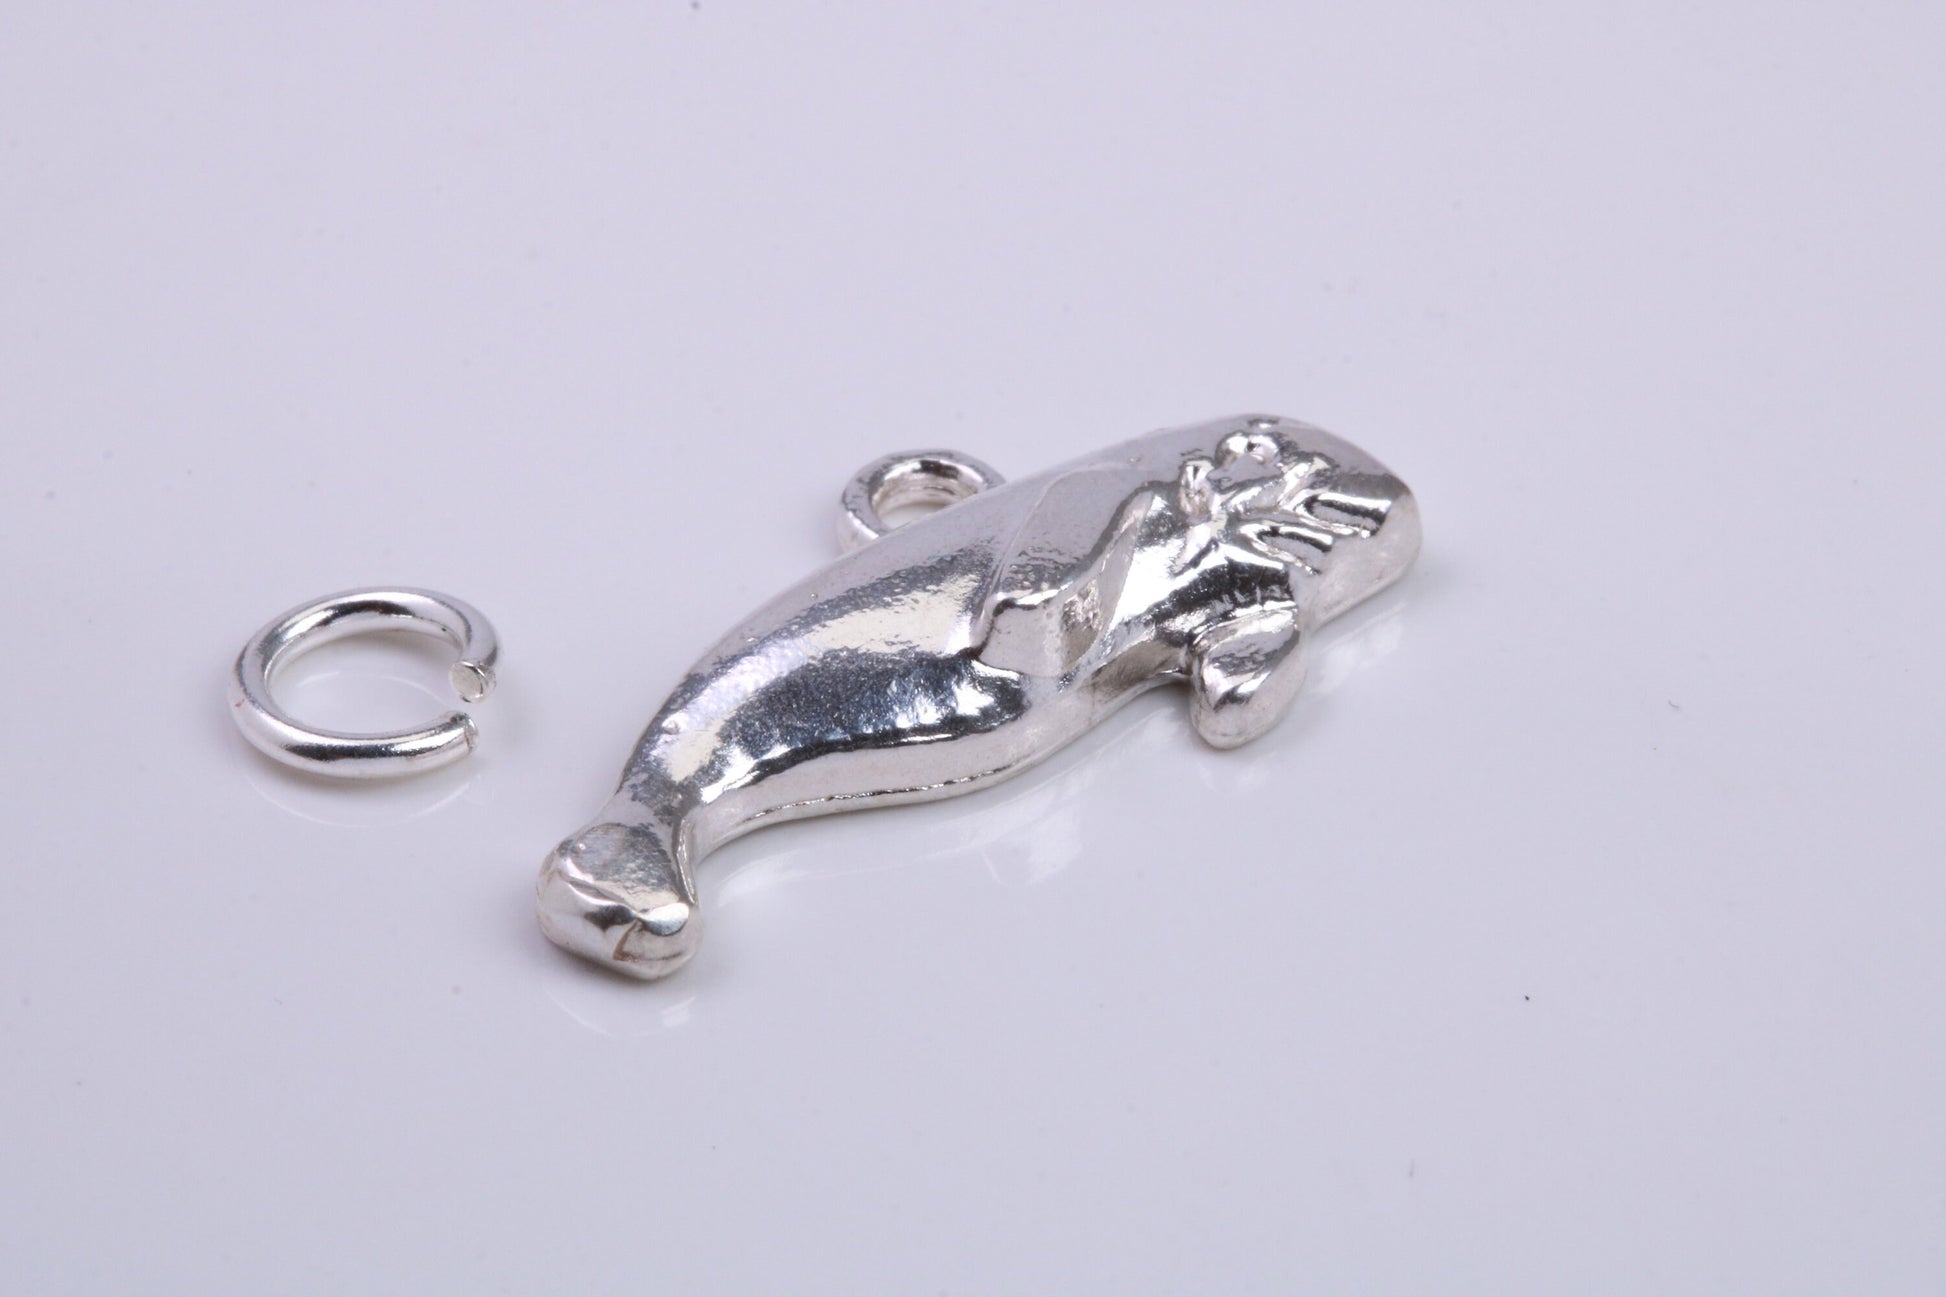 Manatee Charm, Traditional Charm, Made from Solid 925 Grade Sterling Silver, Complete with Attachment Link